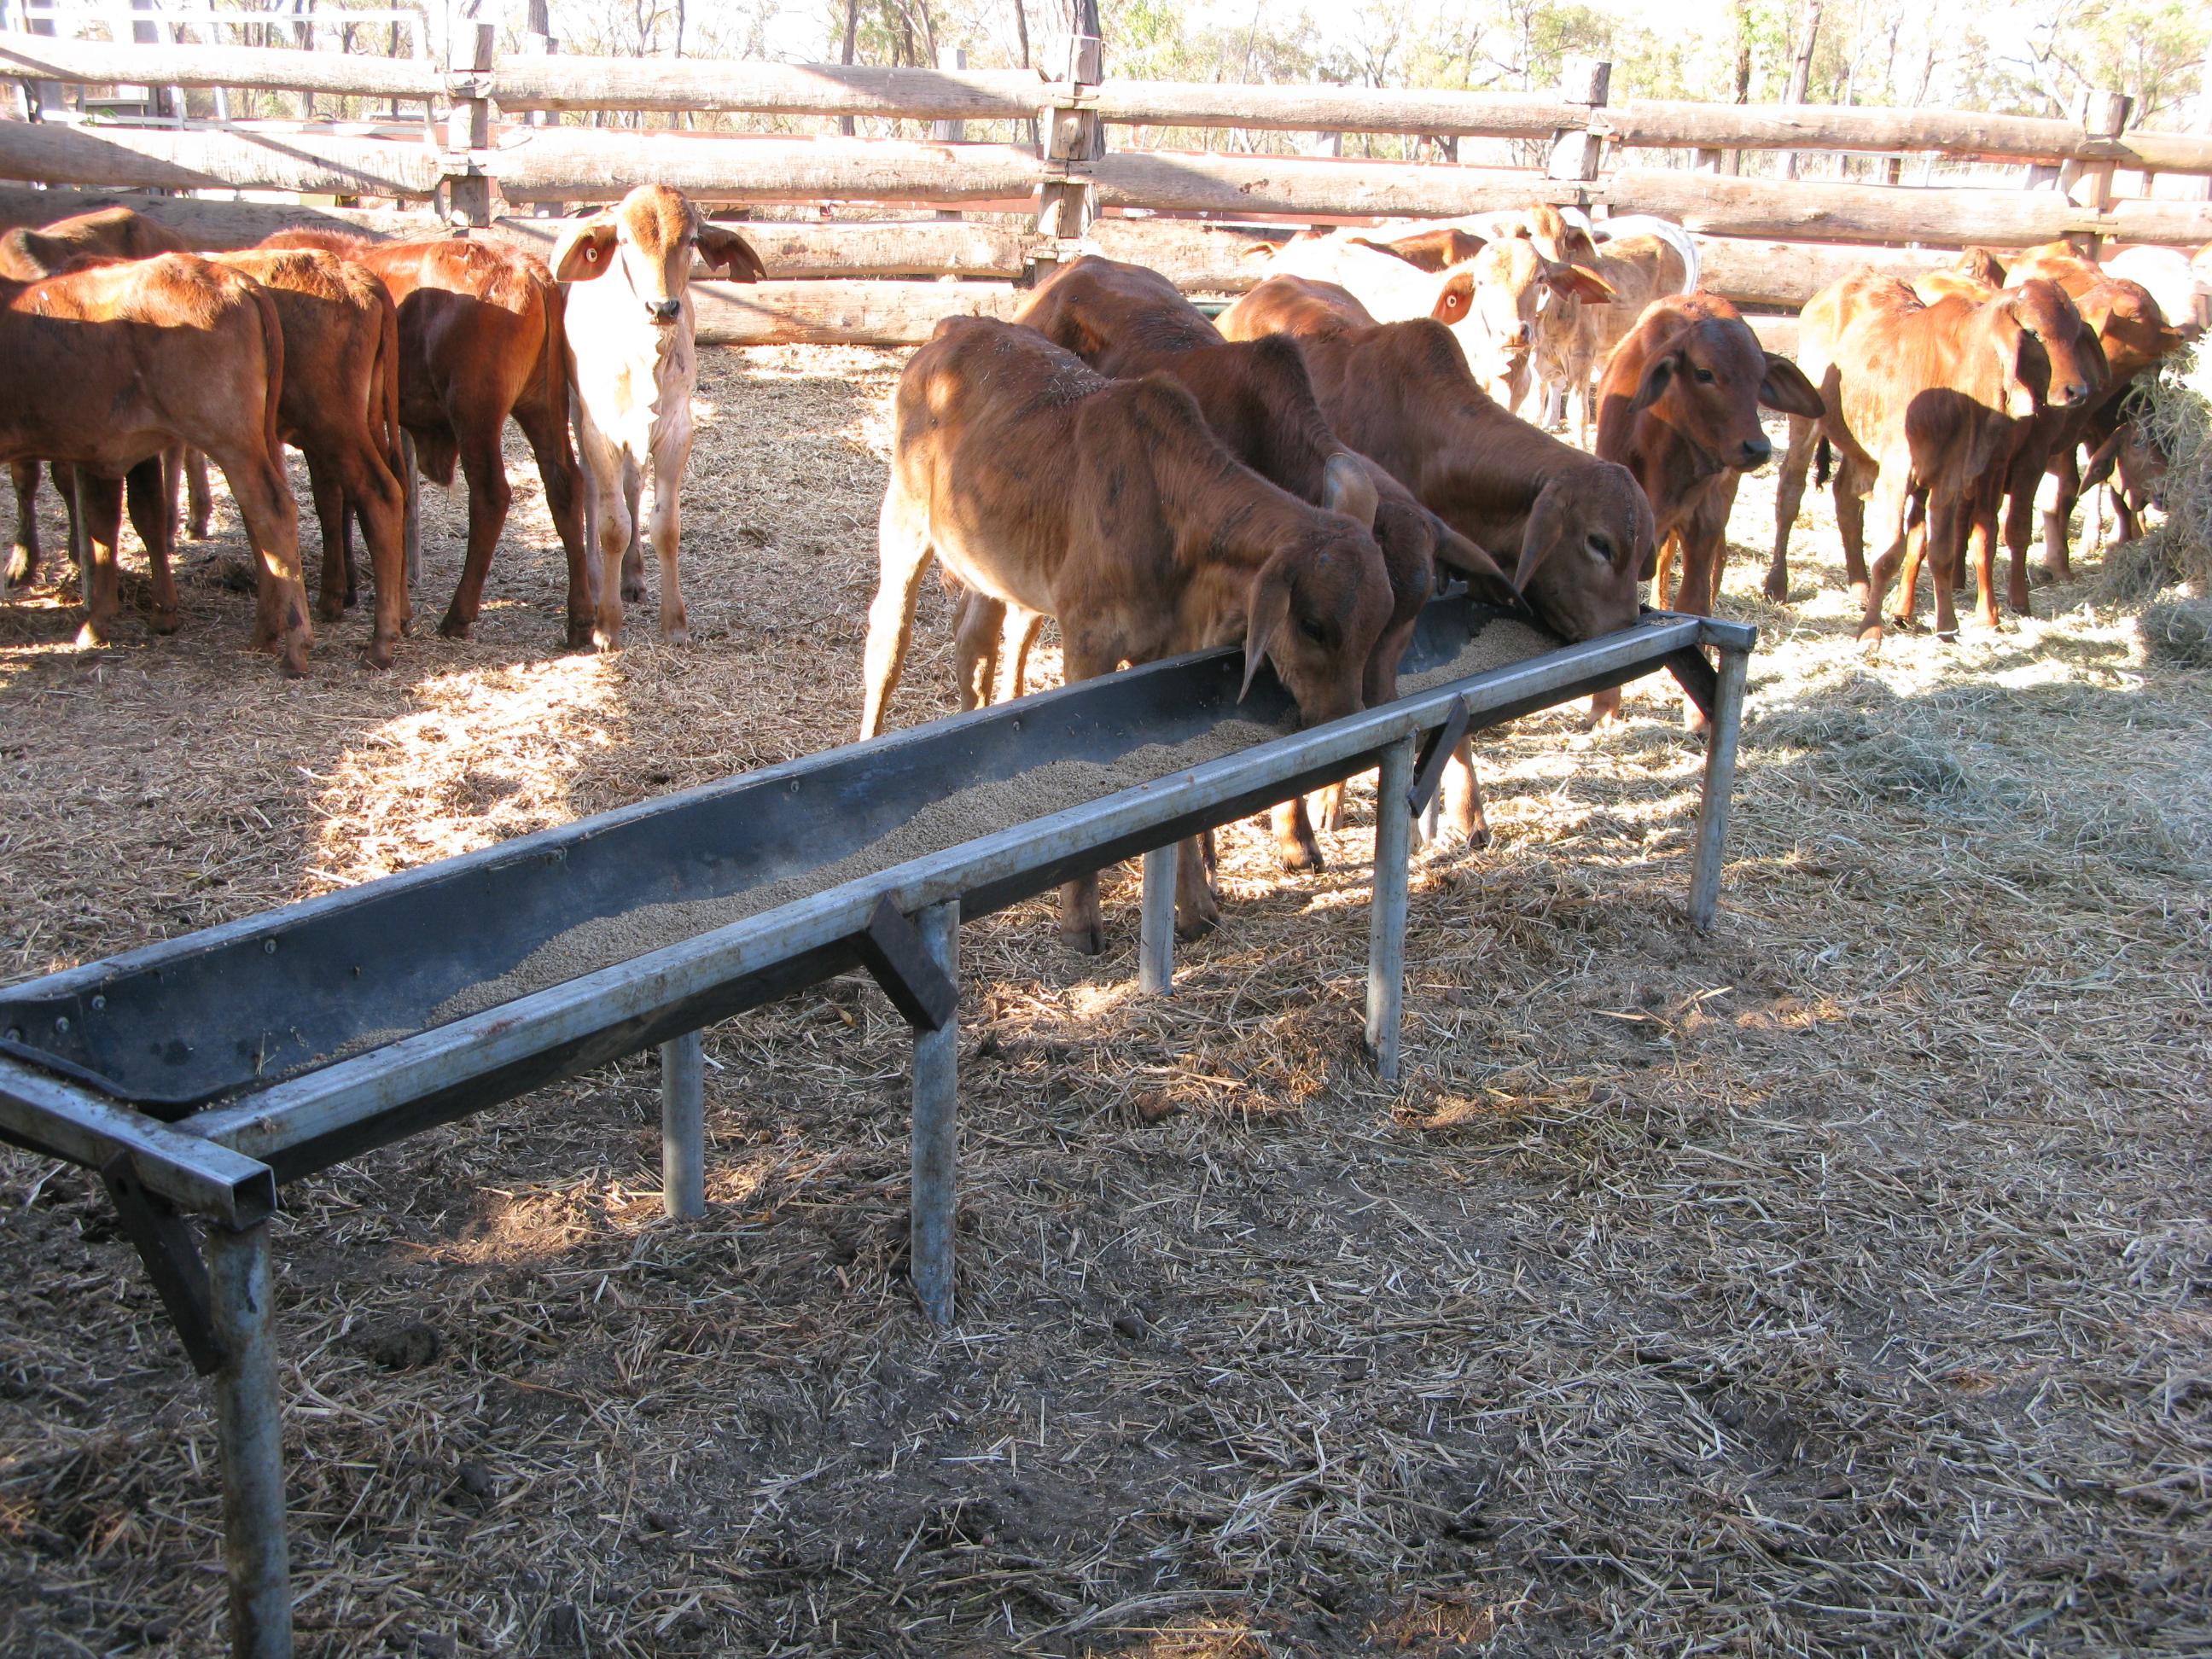 weaners eating out of trough in yards